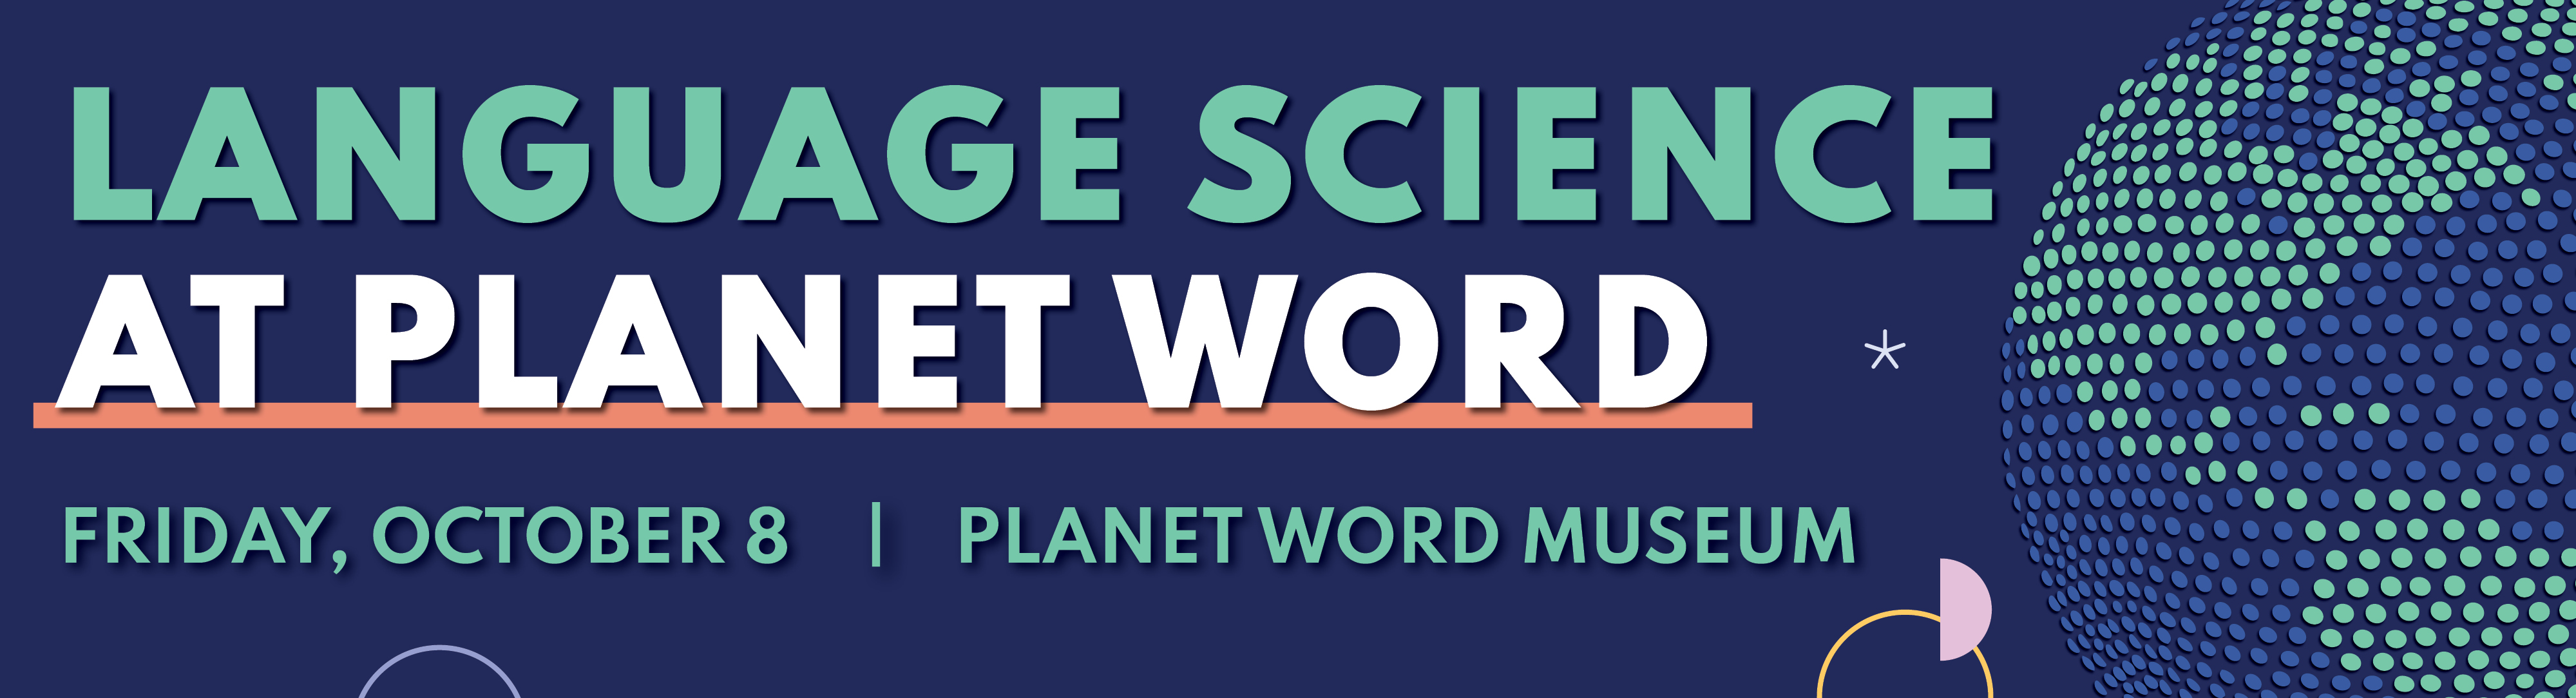 Language Science at Planet Word. Friday, October 8. Planet Word Museum.